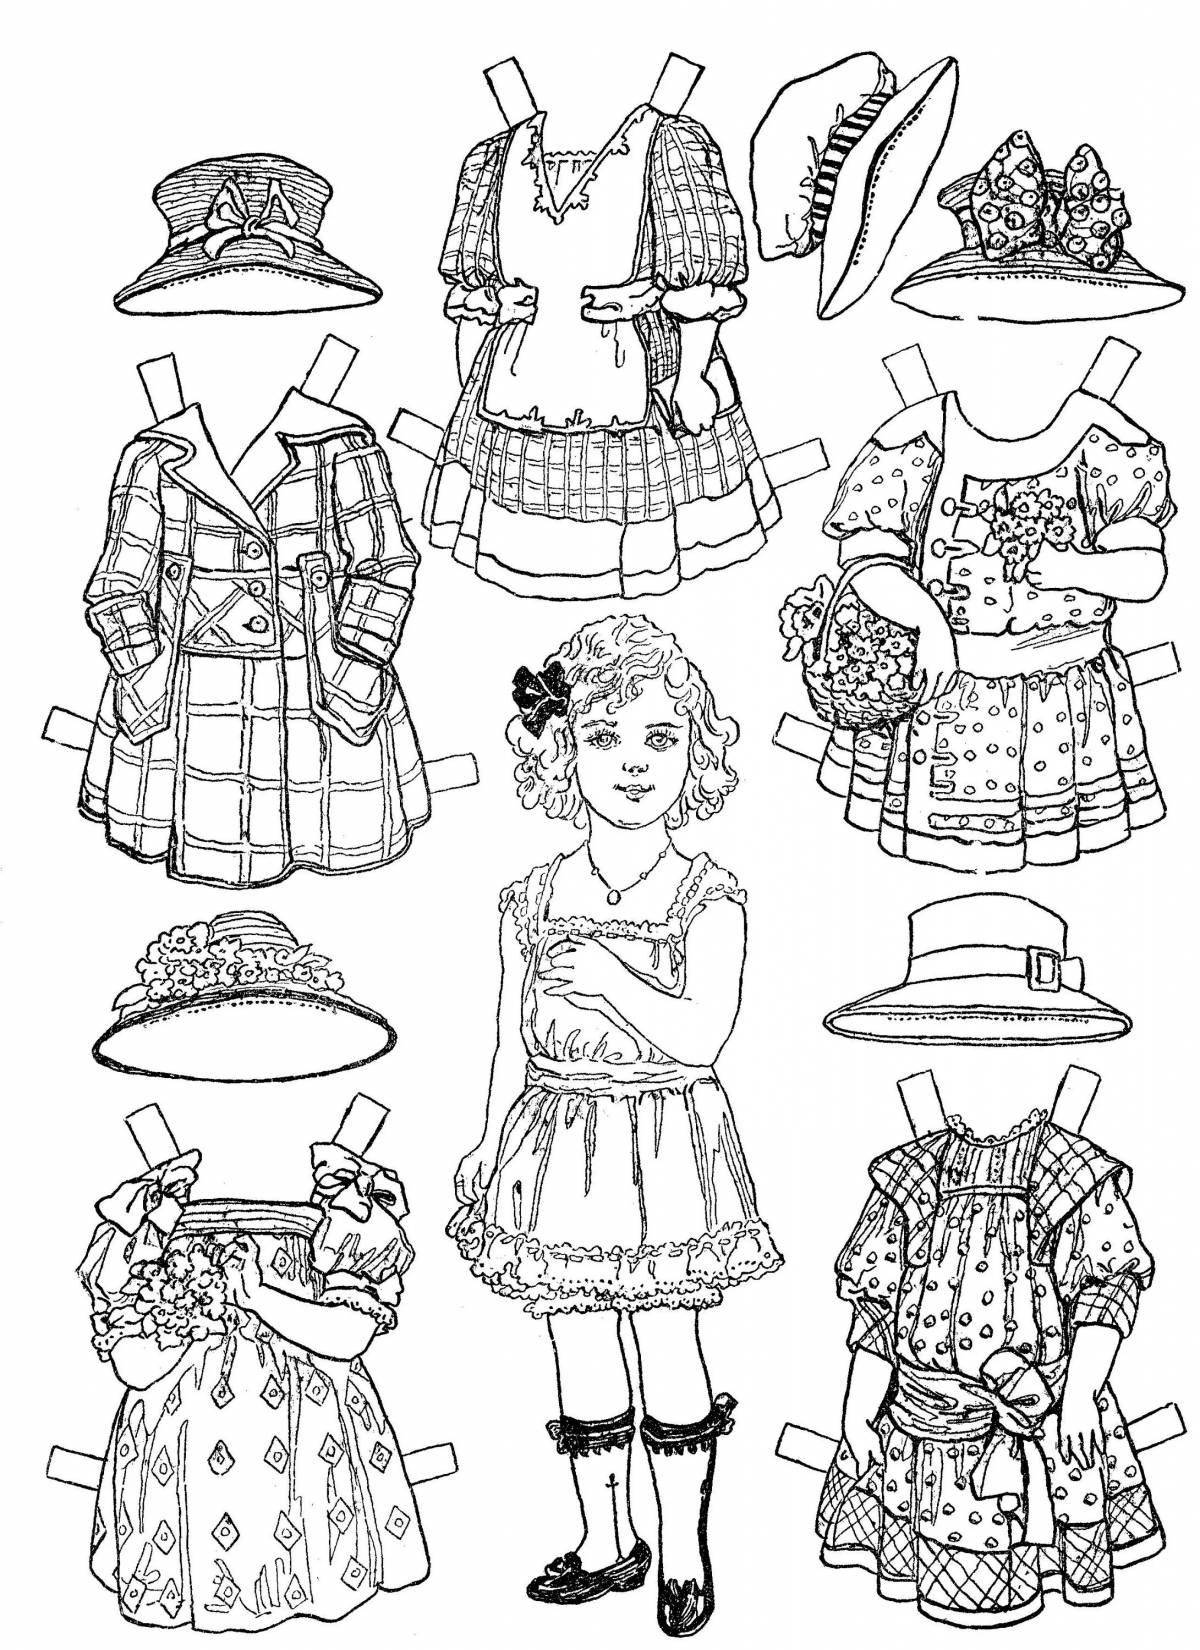 Awesome fashionable clothes coloring book